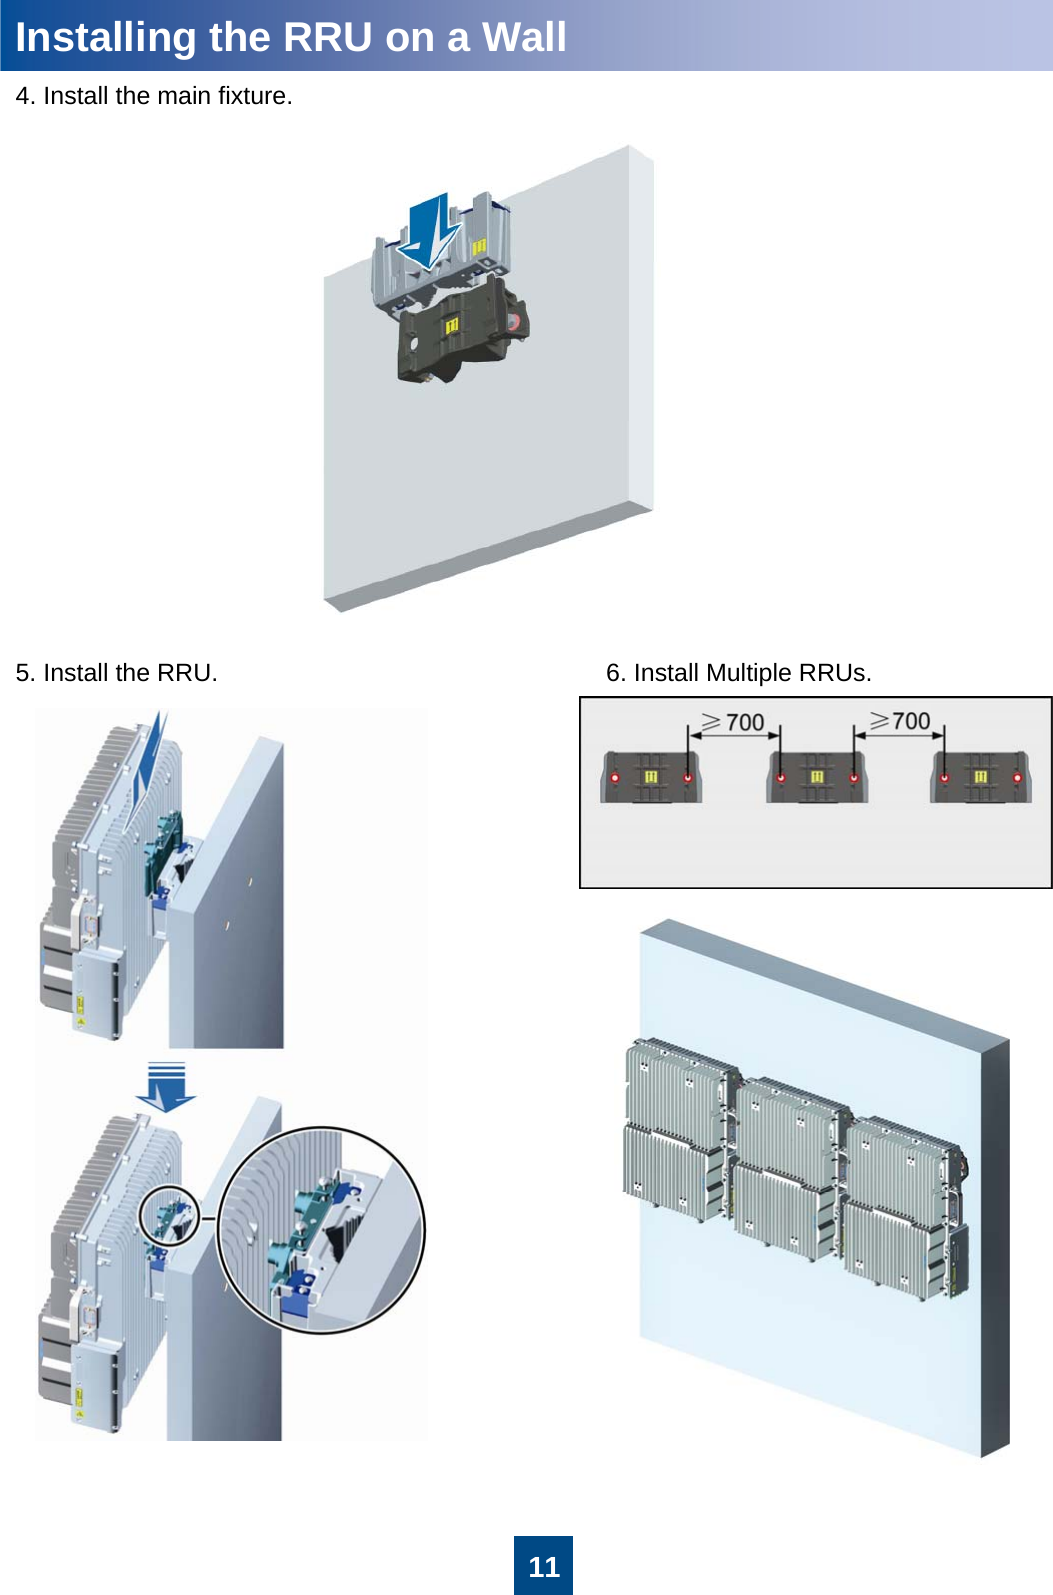 11Installing the RRU on a Wall4. Install the main fixture.5. Install the RRU. 6. Install Multiple RRUs.